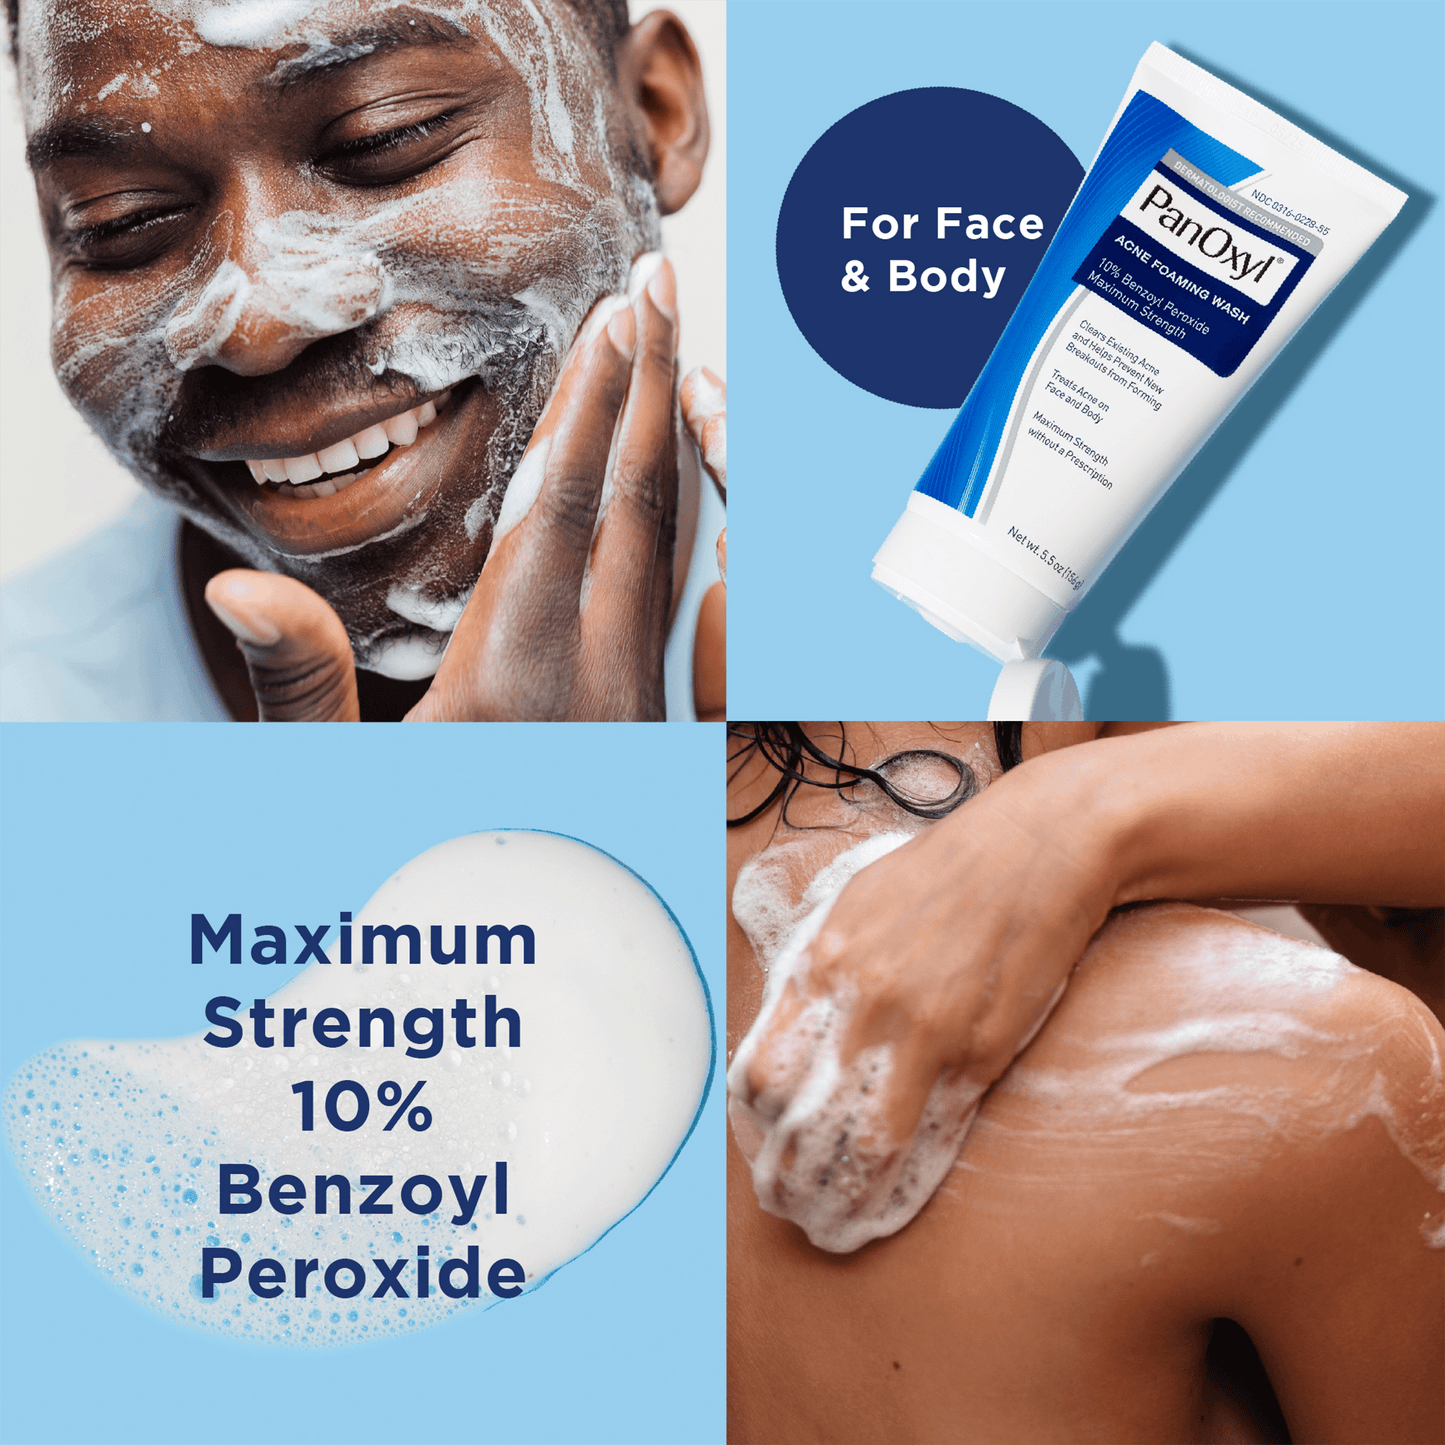 PanOxyl ®️ Acne Creamy Wash 4% Benzoyl Peroxide Daily Control • Acne Creamy Wash Against Acne & Further Outbreak Of Acne • 1x170gr